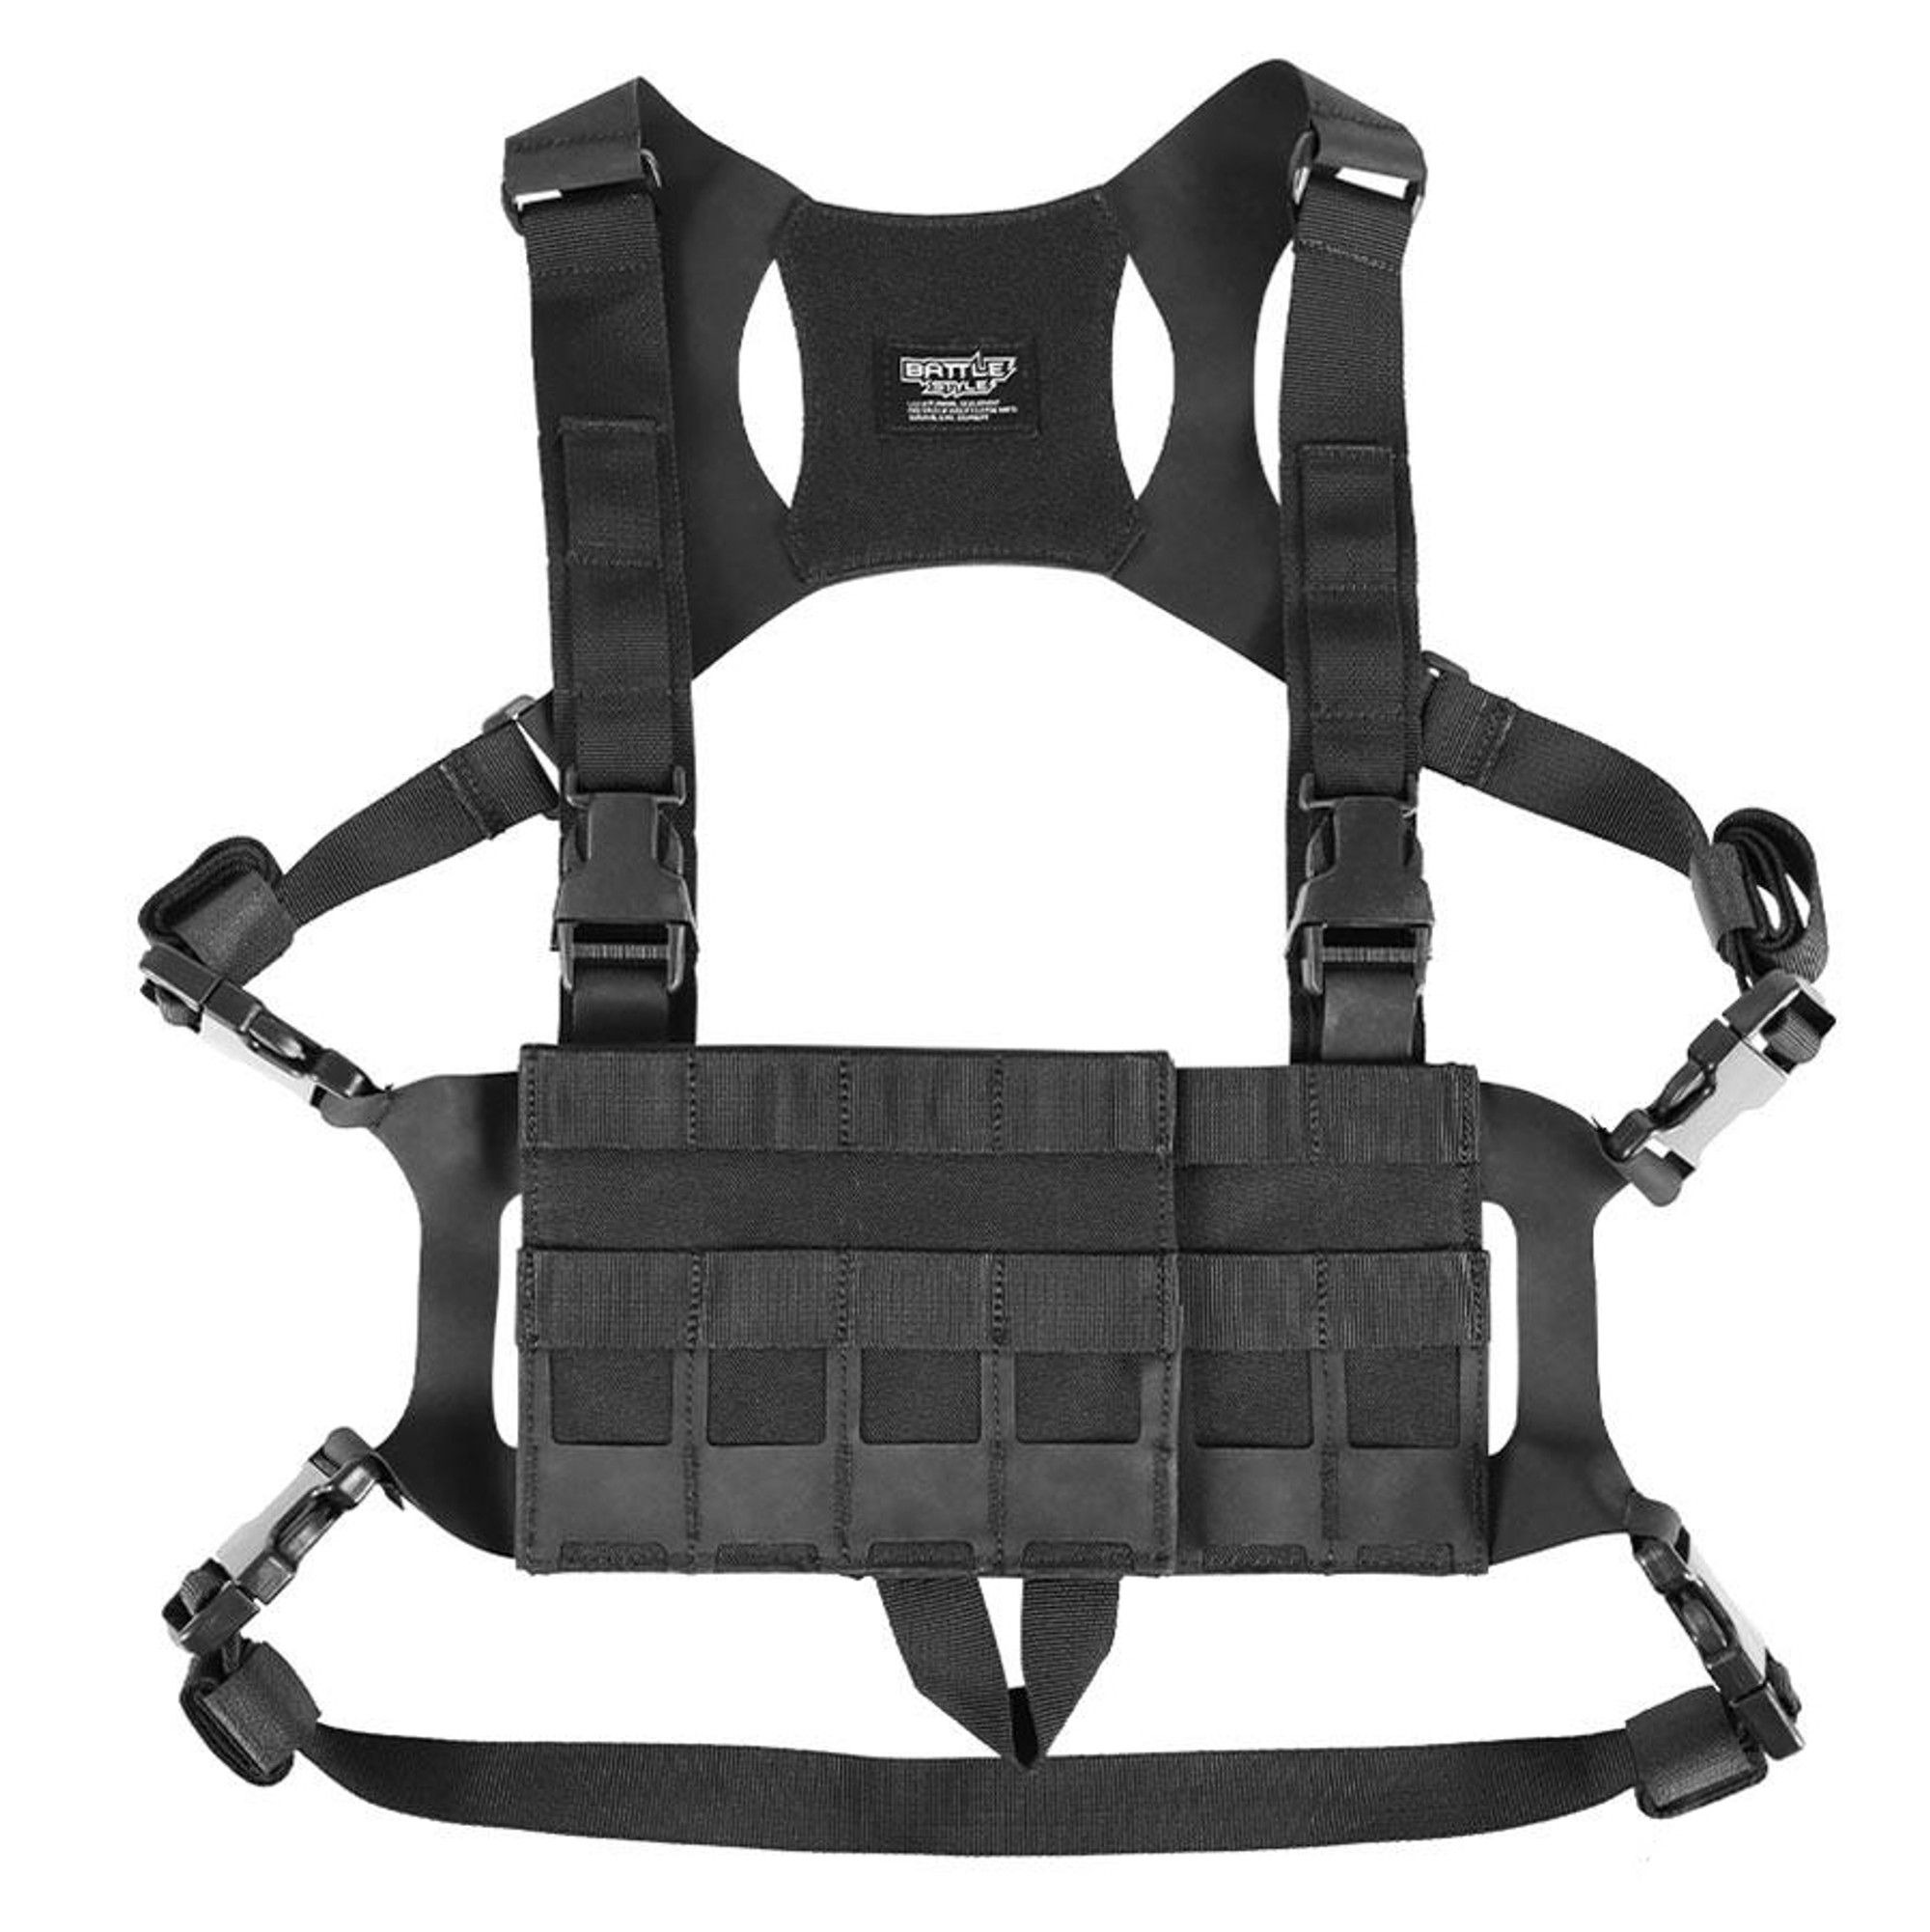 Laylax Battle Style Compact MOLLE Chest Rig (Color: Black)